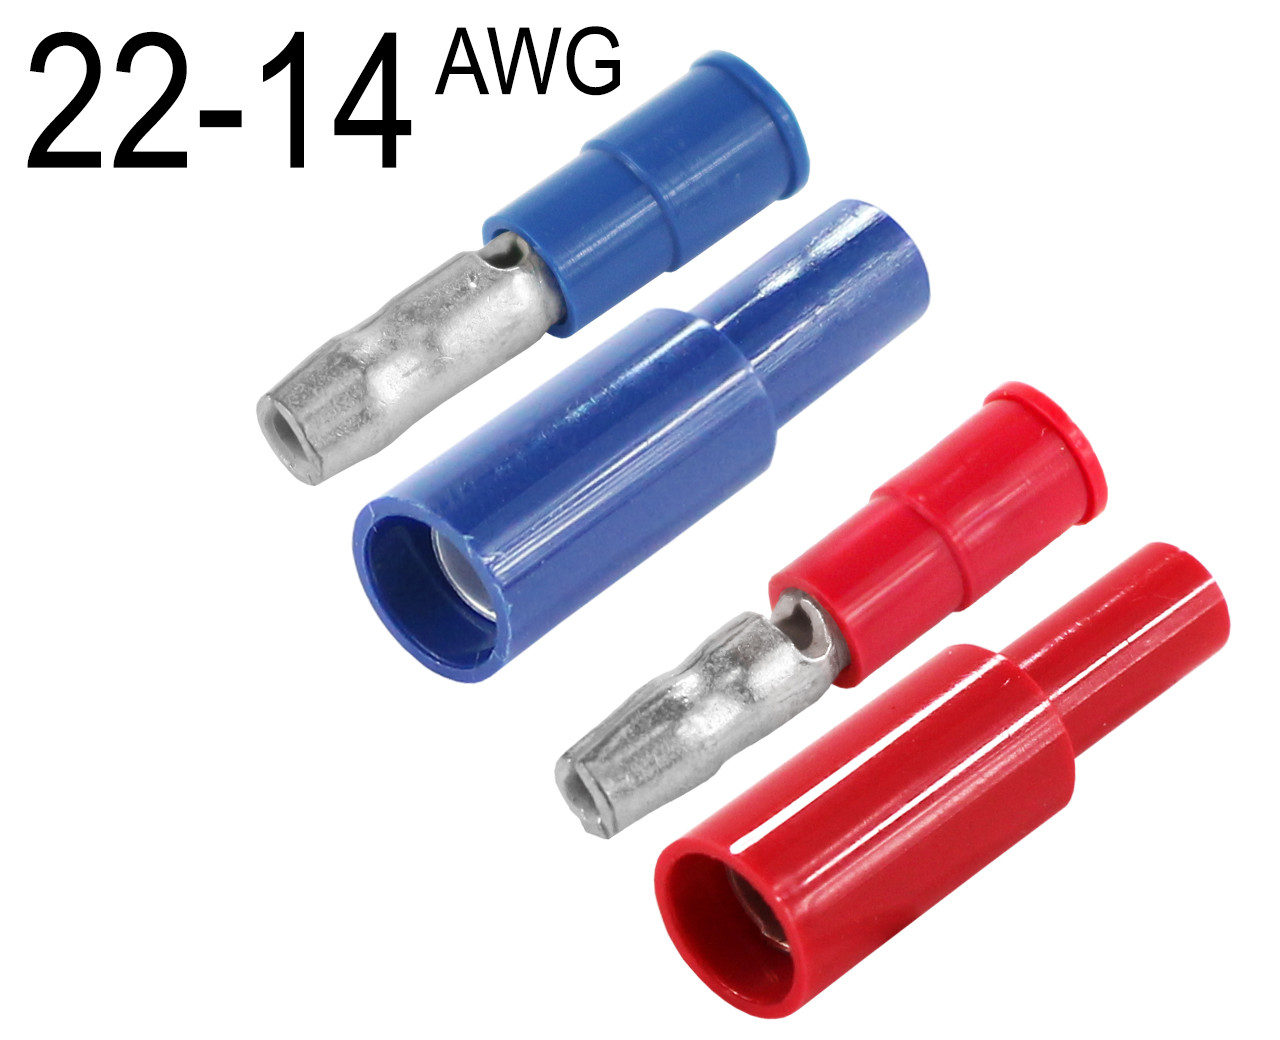 6 Plastic Covers for Electrical Wire Connectors